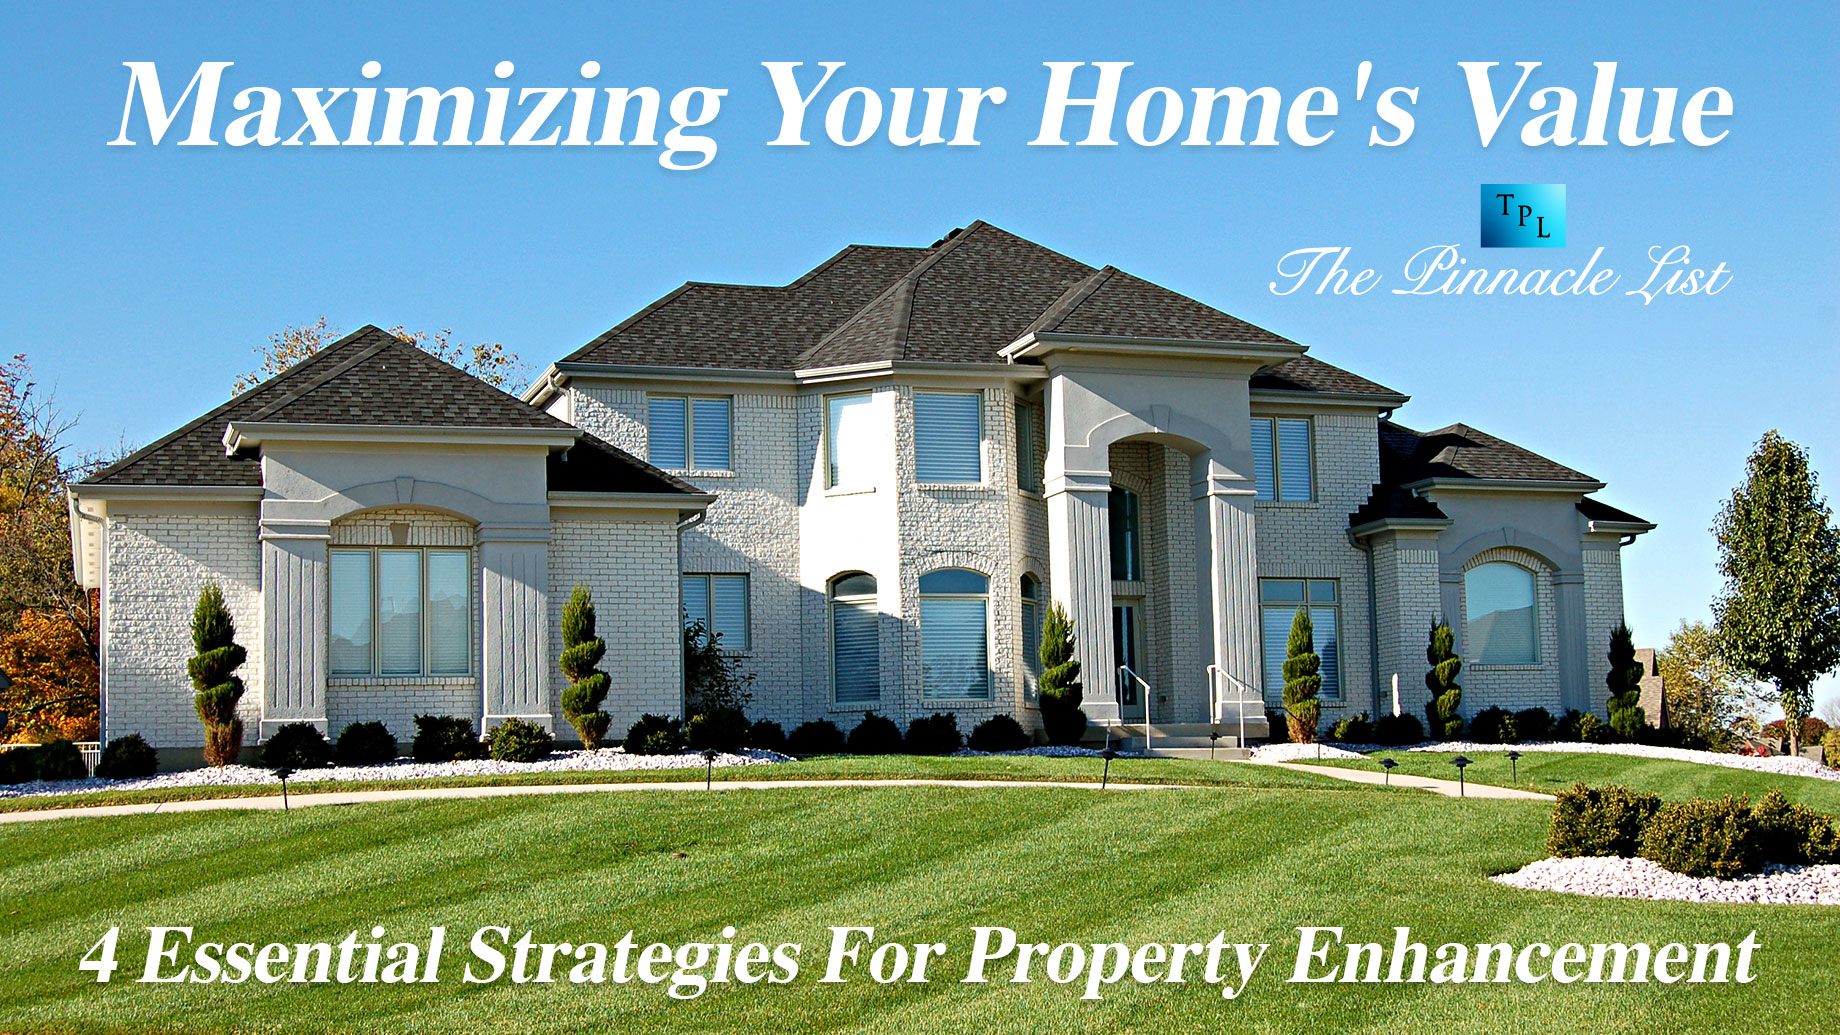 Maximizing Your Home's Value: 4 Essential Strategies For Property Enhancement